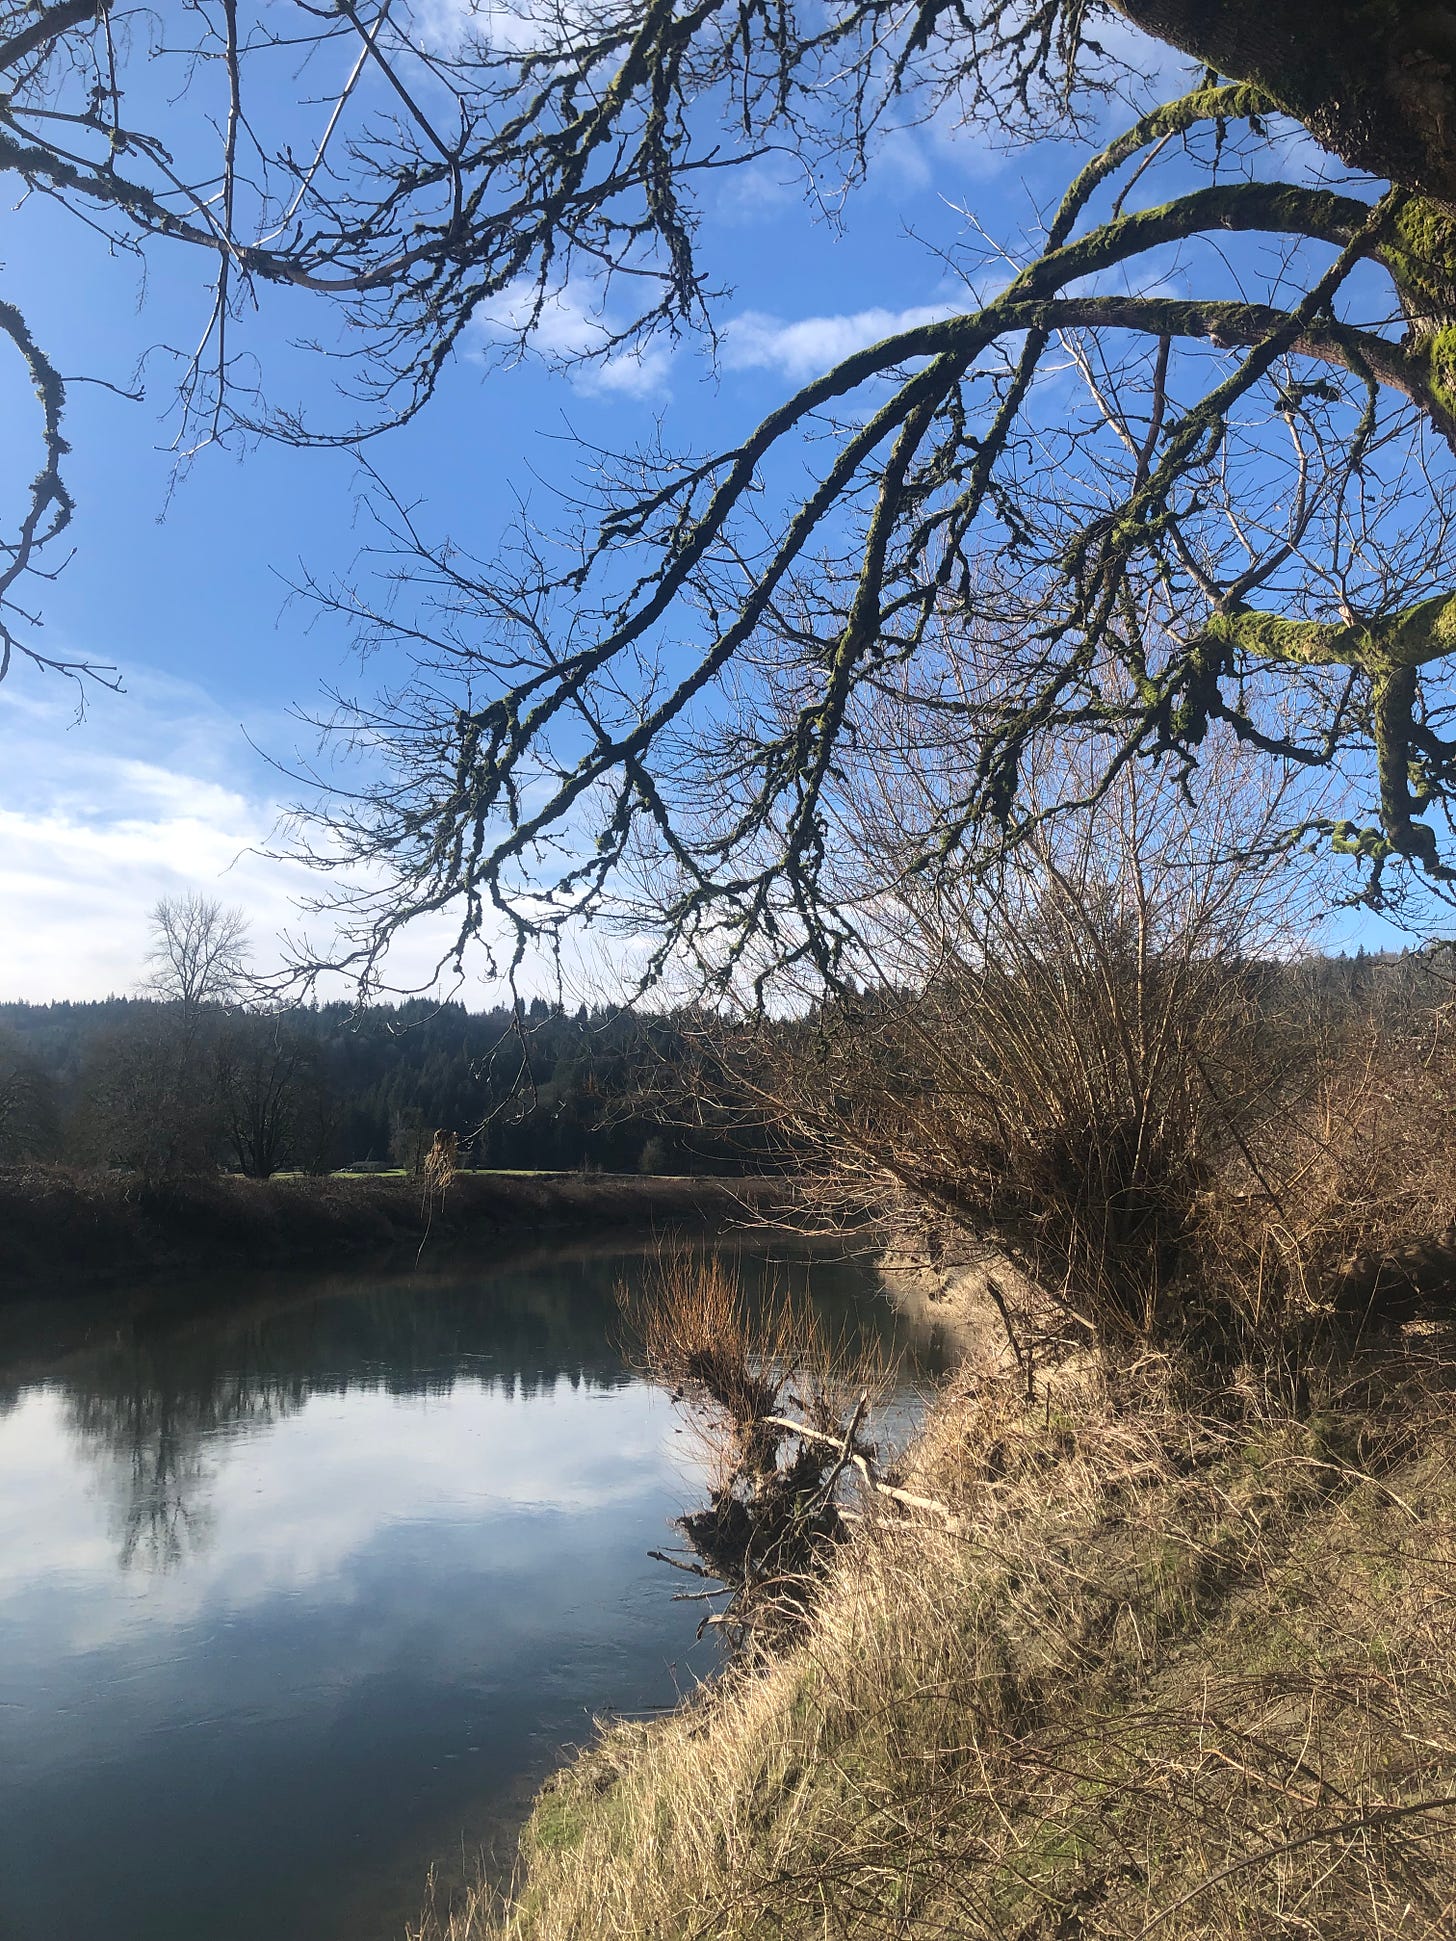 a view of the Snoqualmie River. in the foreground is a tree with moss on the branches. on the slope is dried/dead knotweed and blackberry. it is a sunny day with few clouds in the sky.